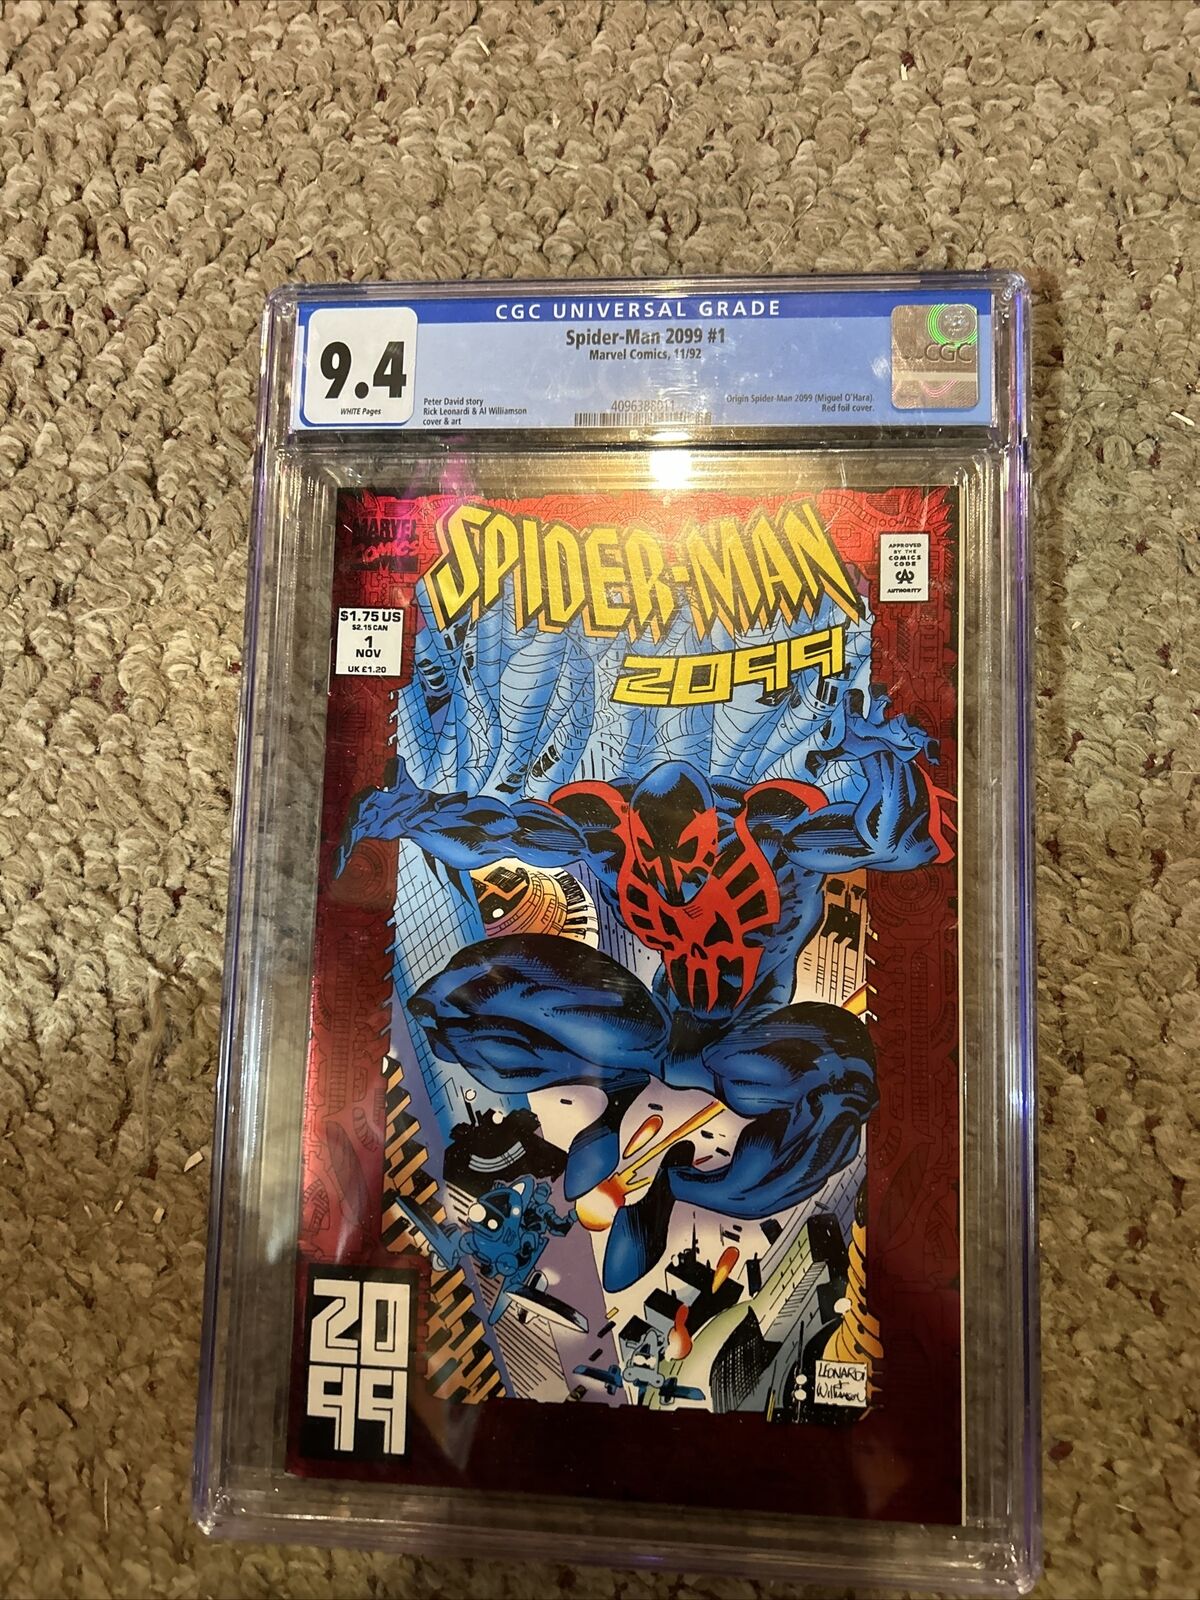 Spider-Man 2099 #1 (First Printing) CGC Graded 9.4 White Pages 1992 Key Issue